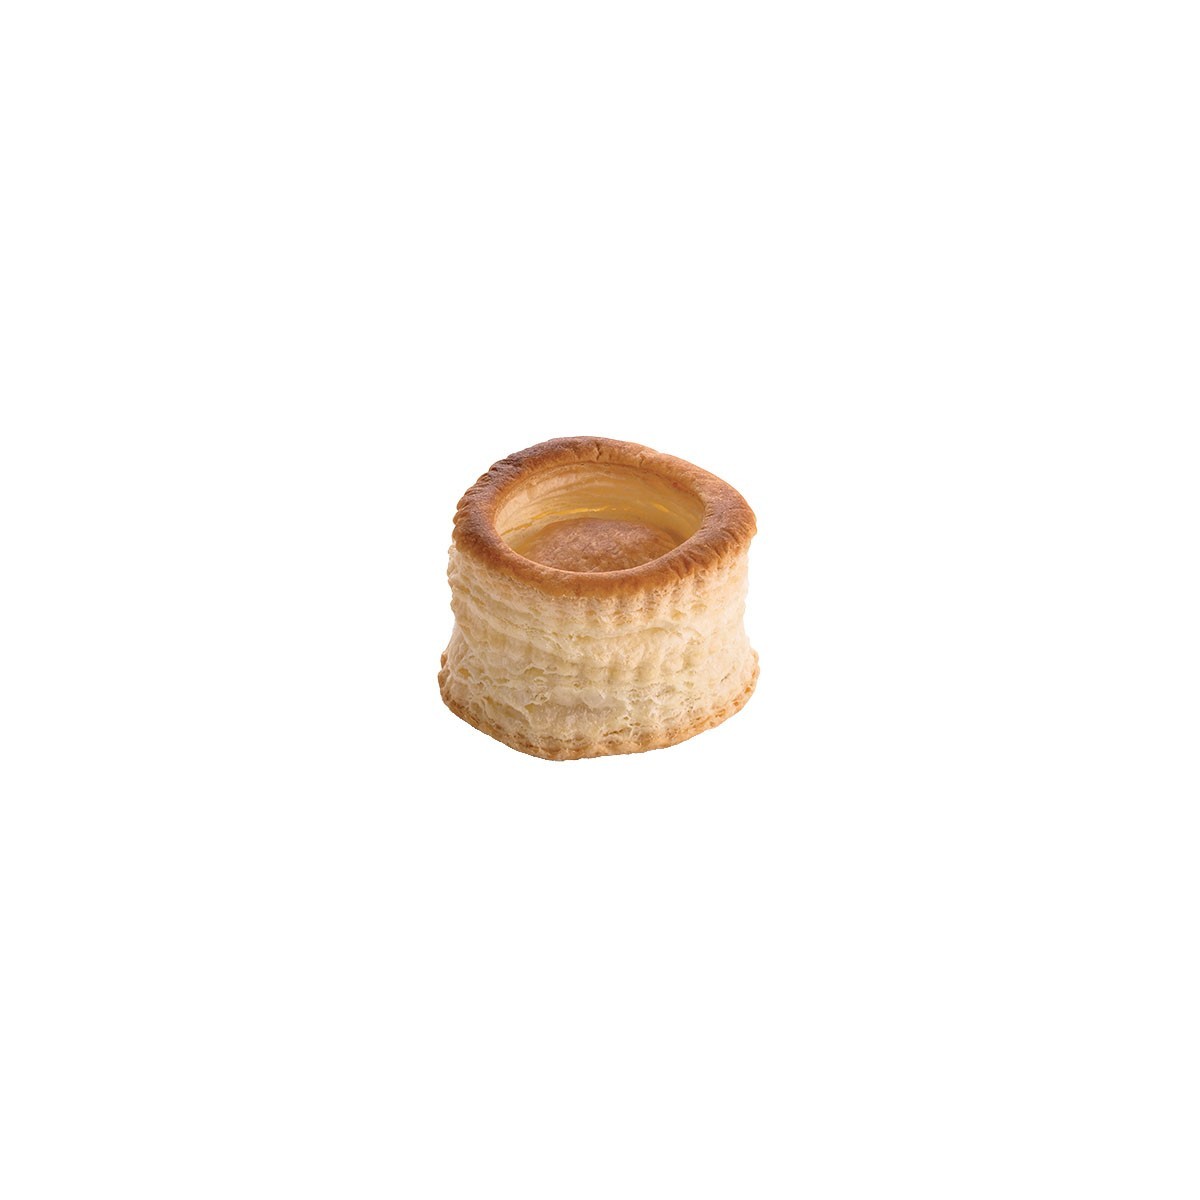 PIDY EMPTY BOUCHEE PUFF PASTRY Ø7CM H4.5CM FIXED HAT 24 PIECES  BOX